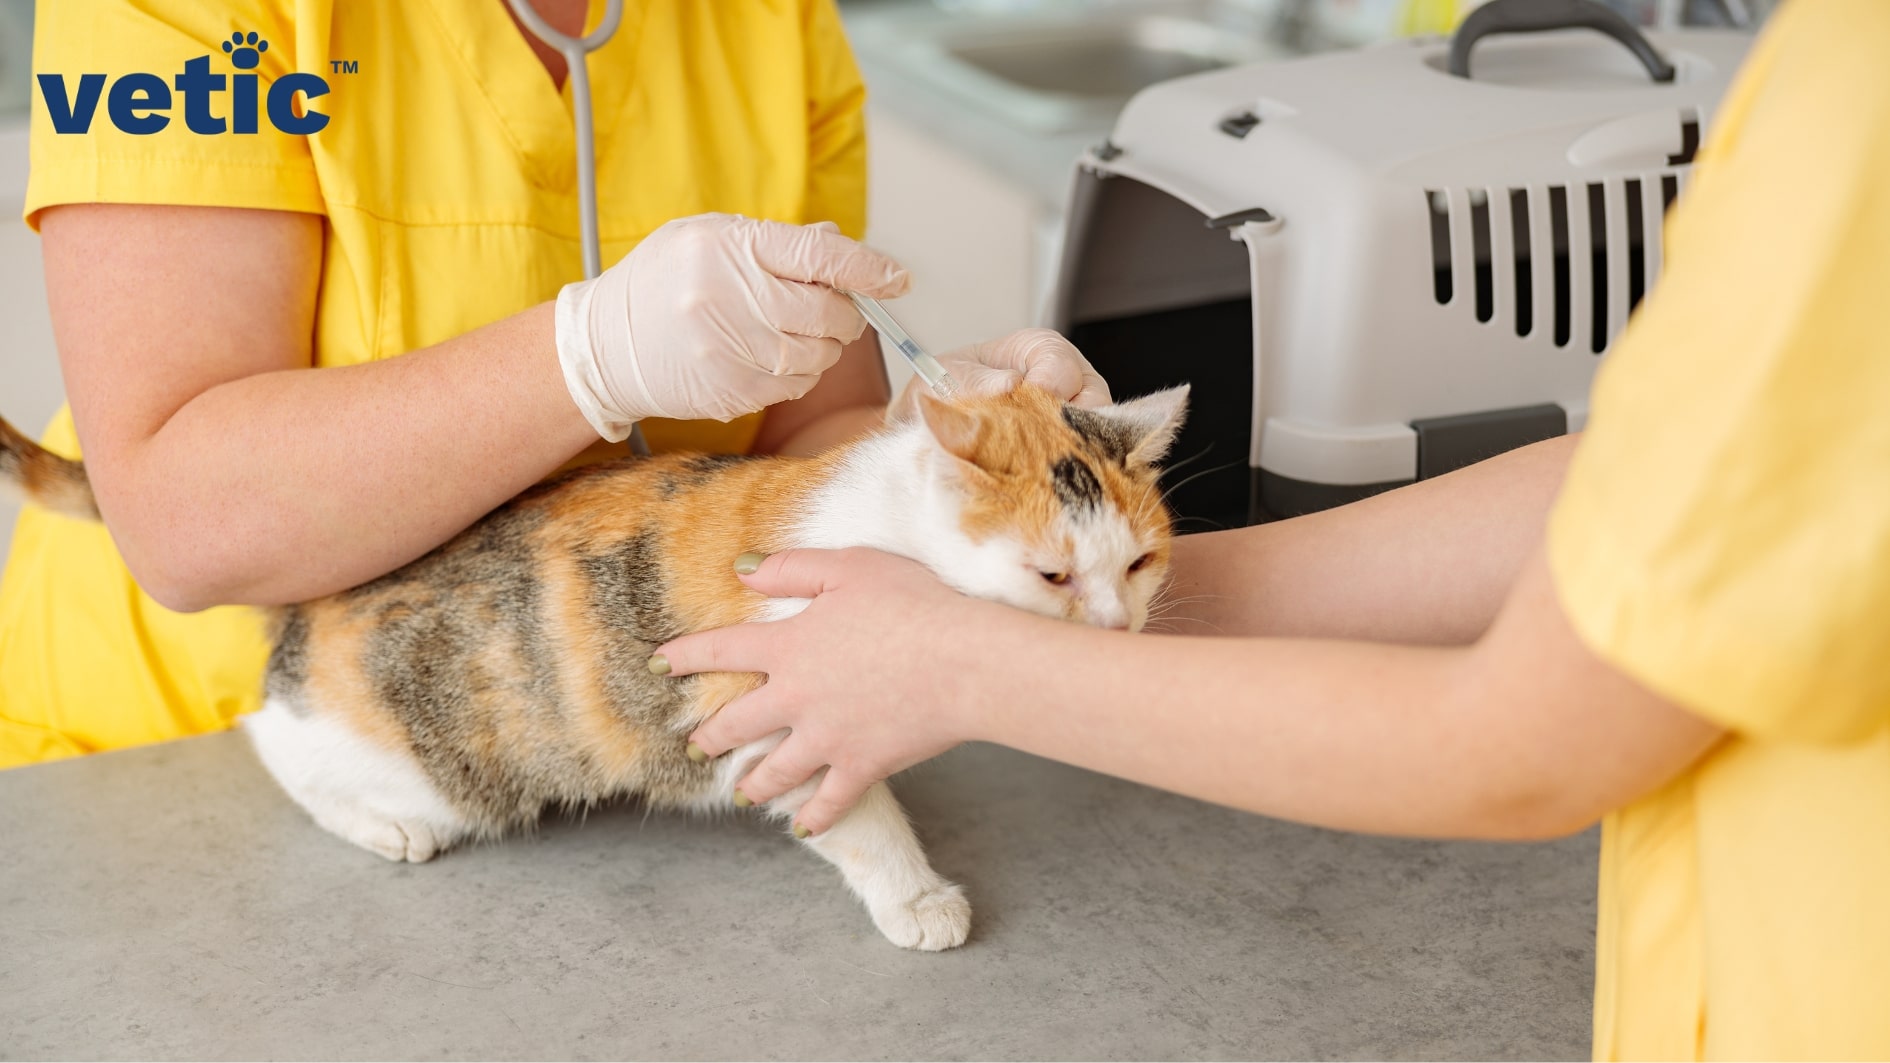 The photo shows a calico cat being held by a veterinarian and possibly their assistant as the doc tries to vaccinate her. a front-open, grey cat carrier is visible on the right upper corner. New cat owners should not delay vaccination dates since it increases the risks of viral infections in cats.